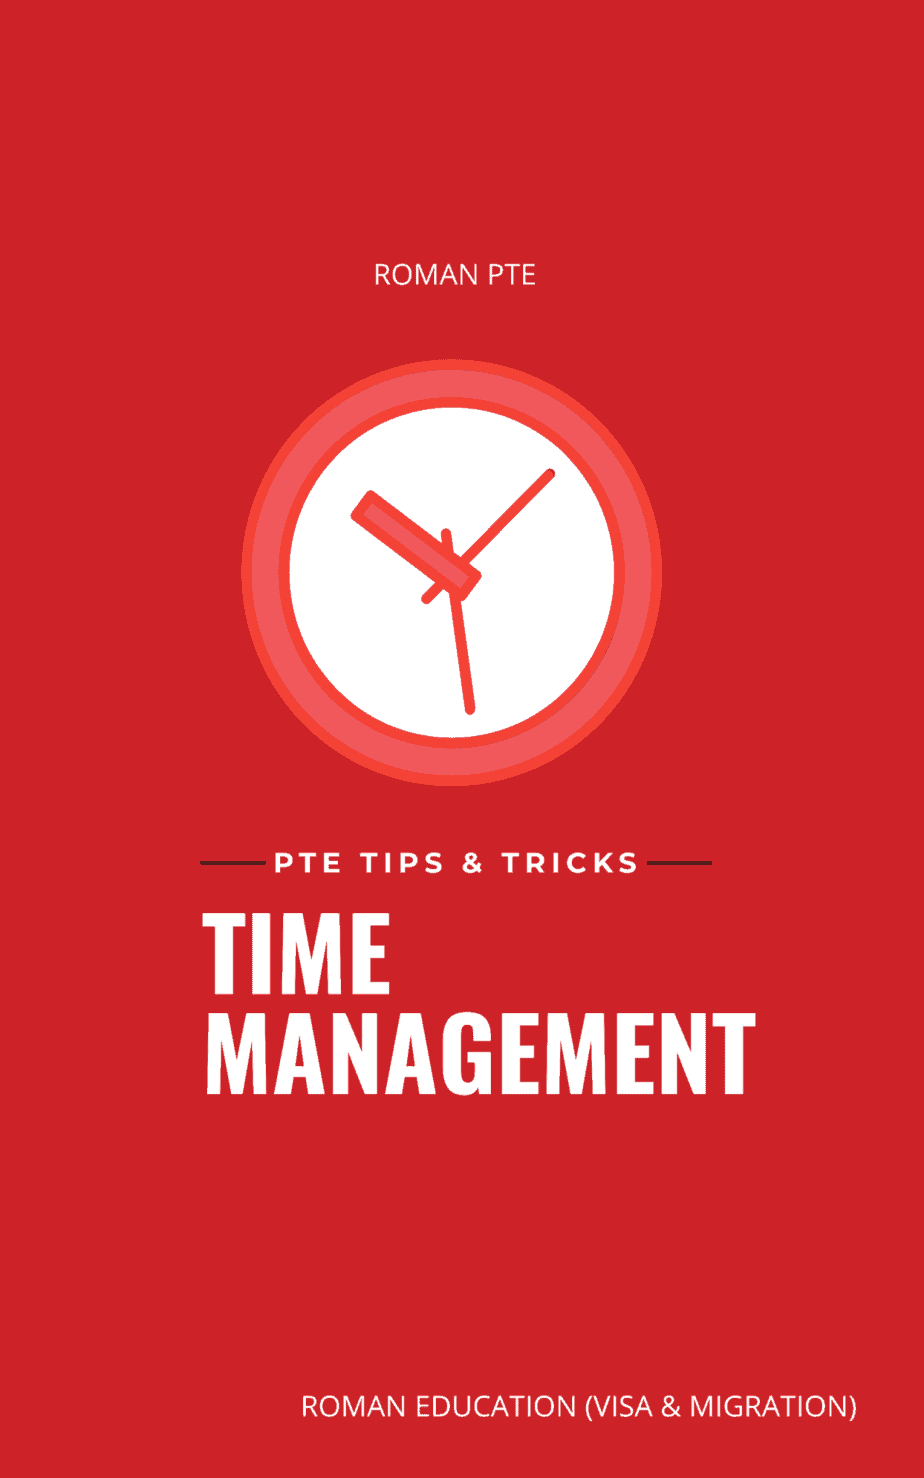 PTE time management